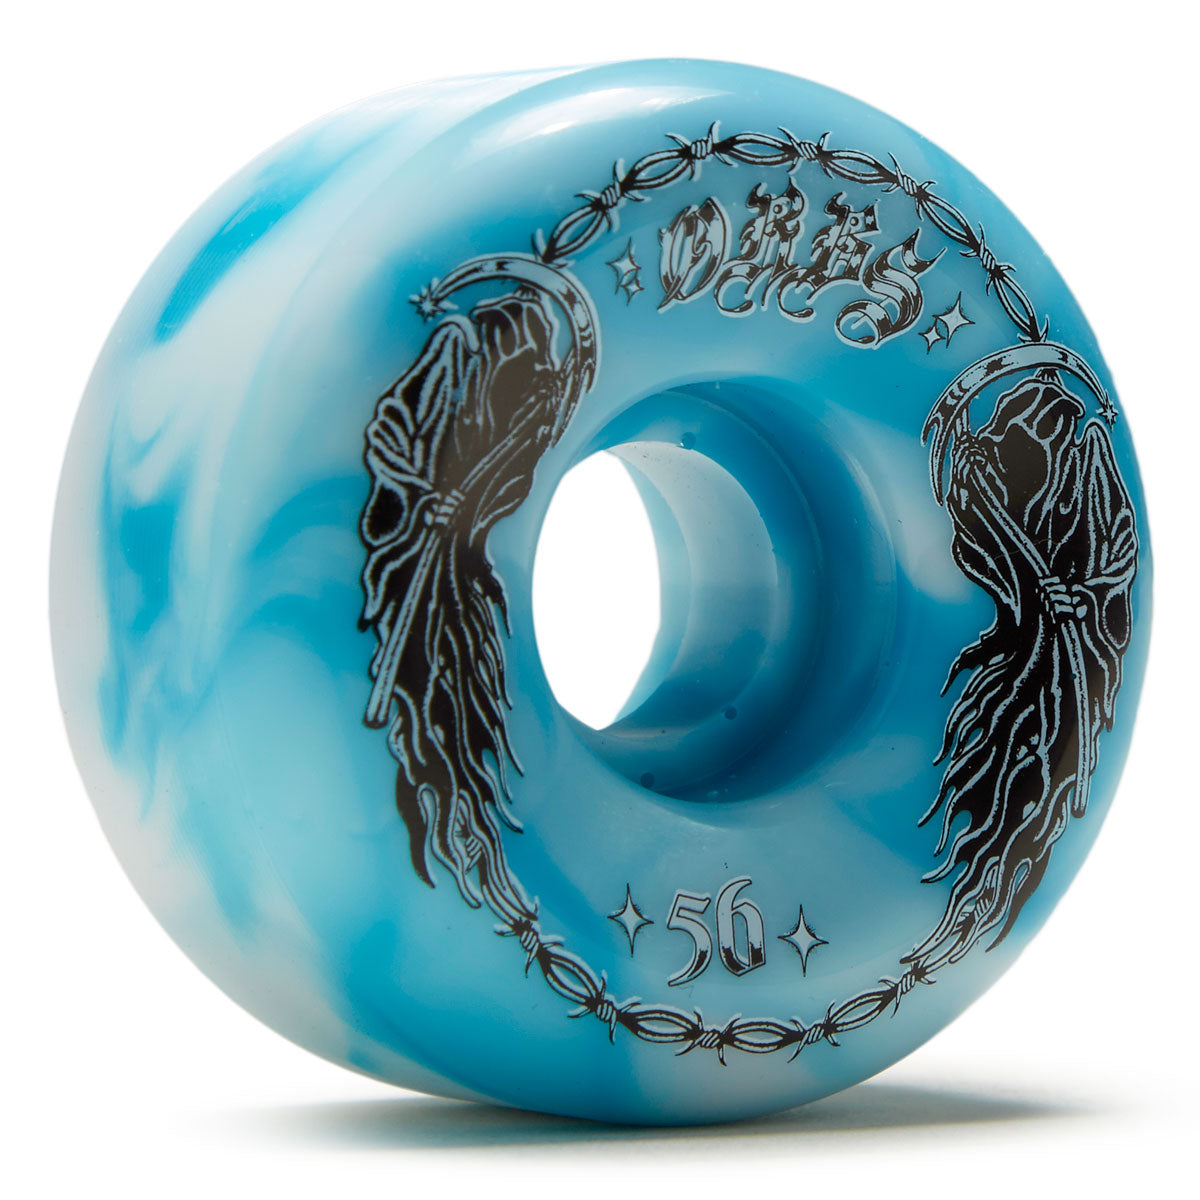 Welcome Orbs Specters '23 Conical 99A Skateboard Wheels - Blue/White Swirl - 56mm image 1